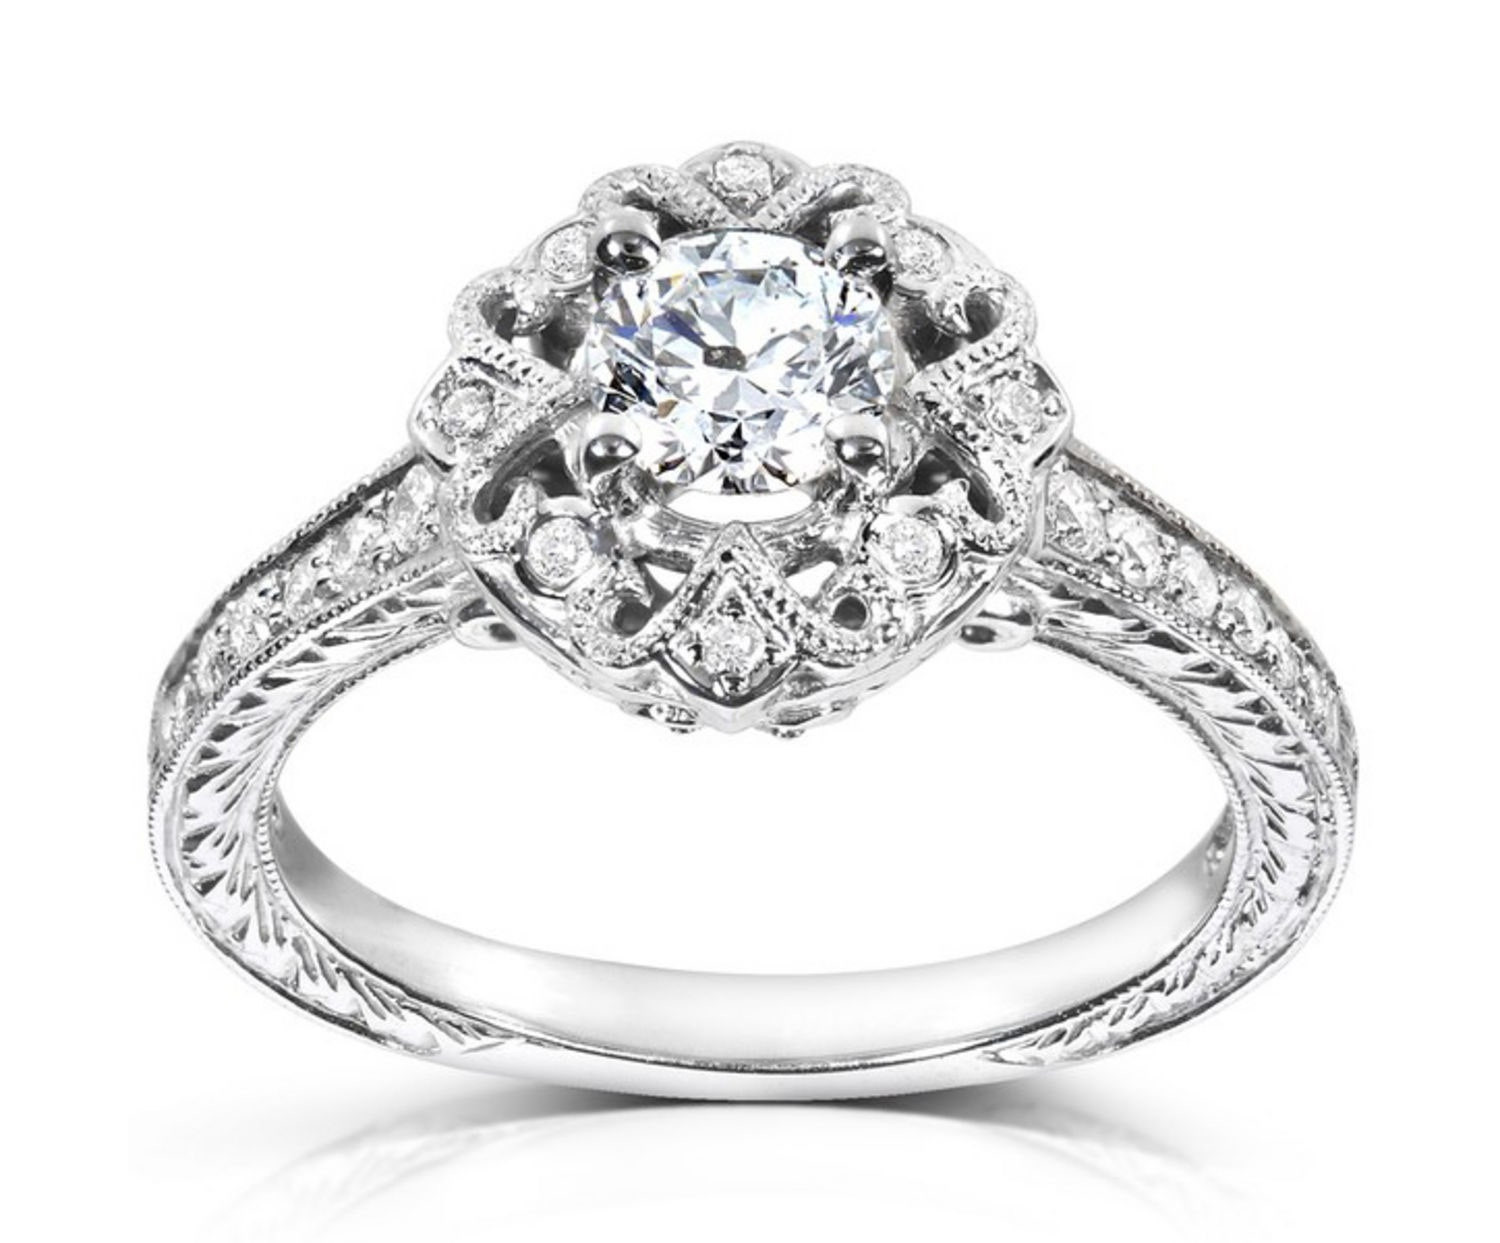 Picture Of Wedding Rings
 Affordable Engagement Rings Under $1 000